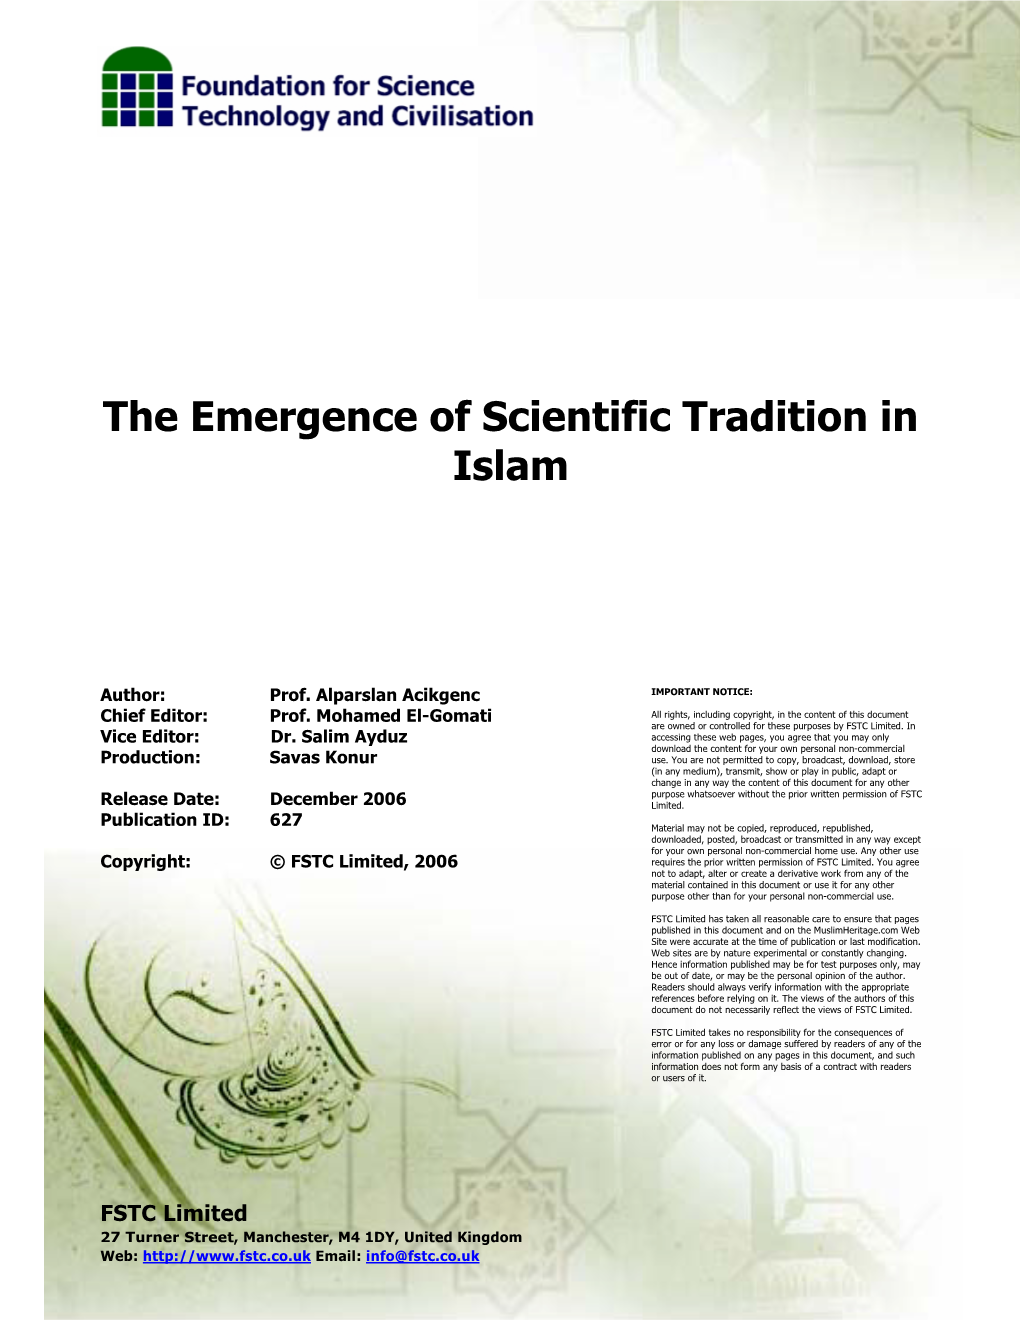 The Emergence of Scientific Tradition in Islam